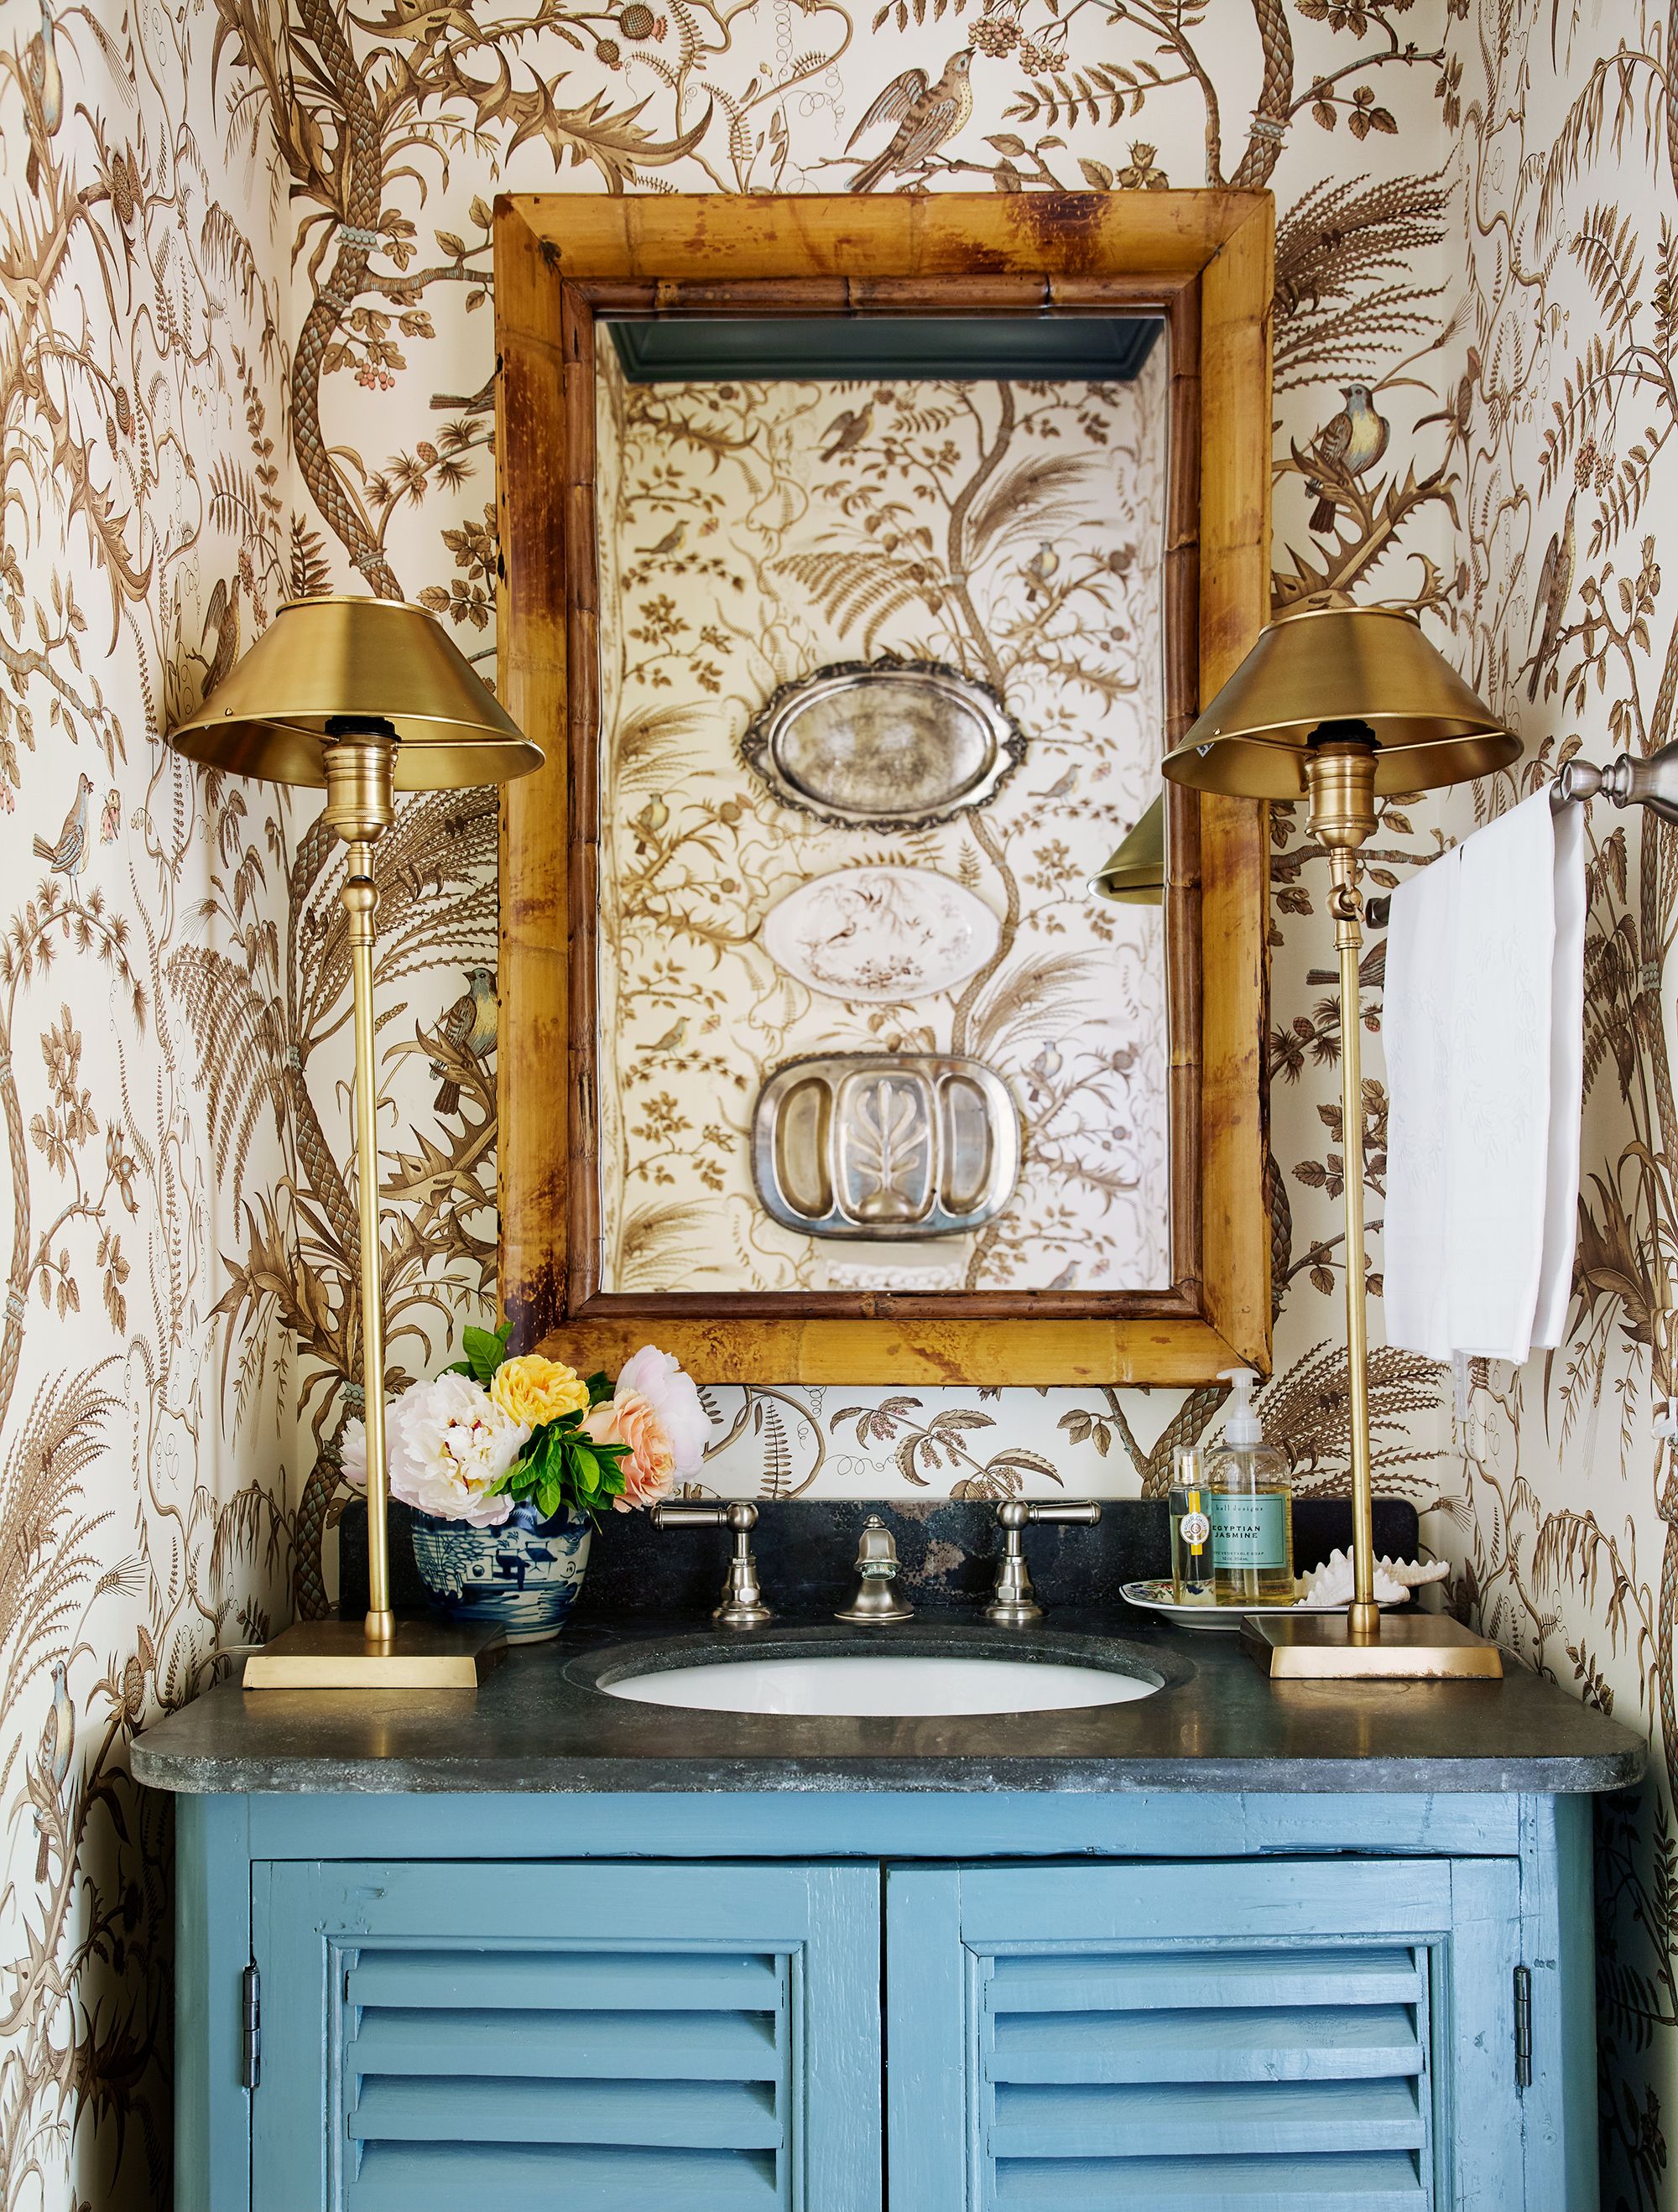 37 Bathroom Wallpaper Ideas That Add Pattern and Color to Your Space